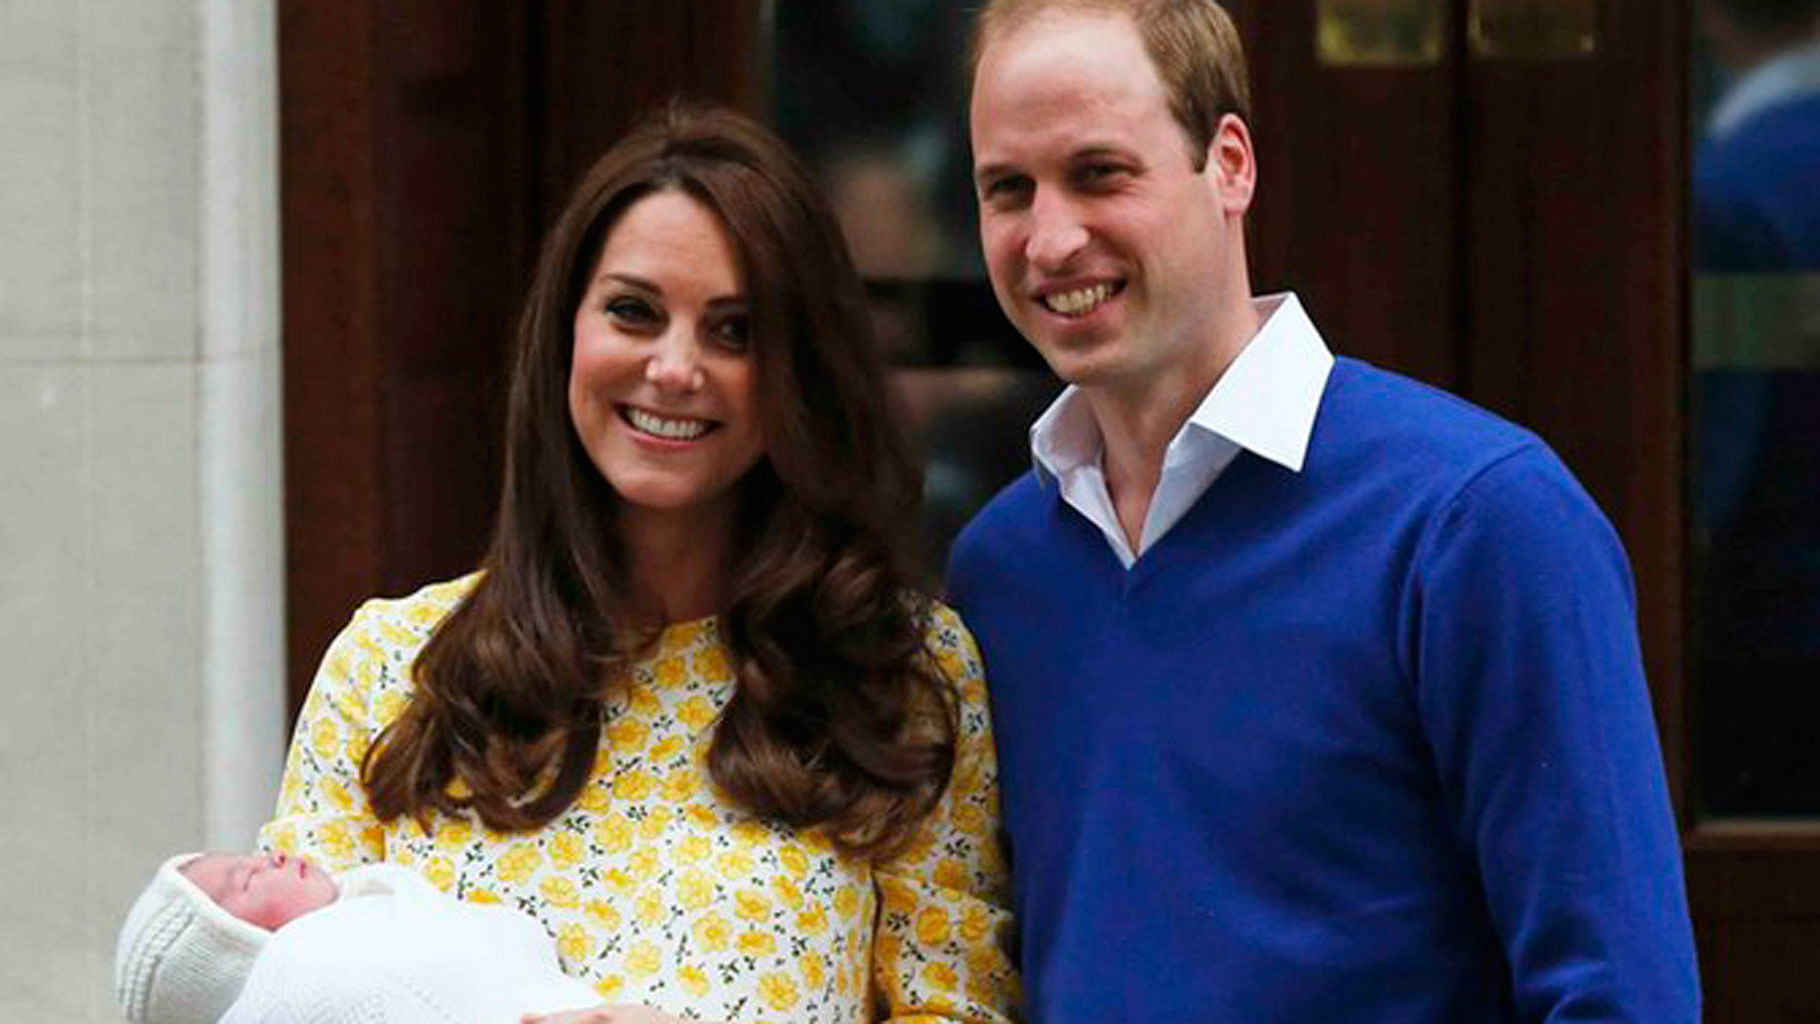 Britain’s Prince William and Kate, Duchess of Cambridge and their newborn baby girl pose for cameras as they leave St Mary’s Hospital’s exclusive Lindo Wing in London on Saturday, 2 May 2015. (Photo: Reuters)